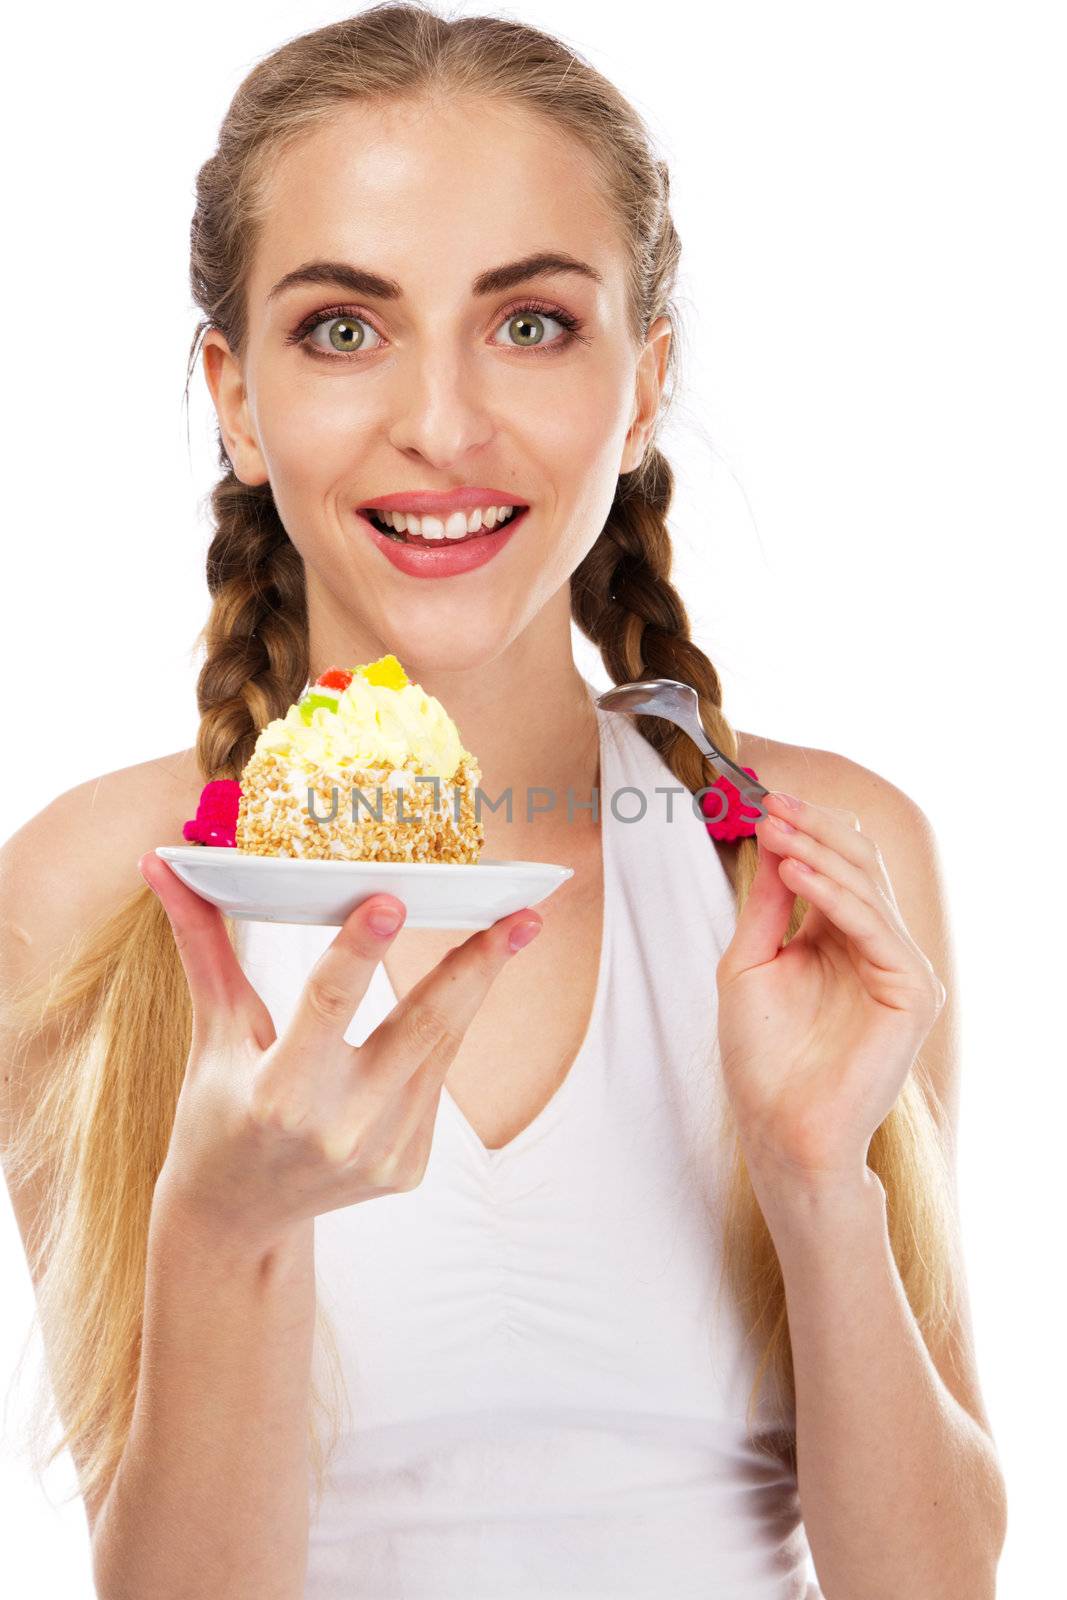 Young lady tasting a cake, studio portrait